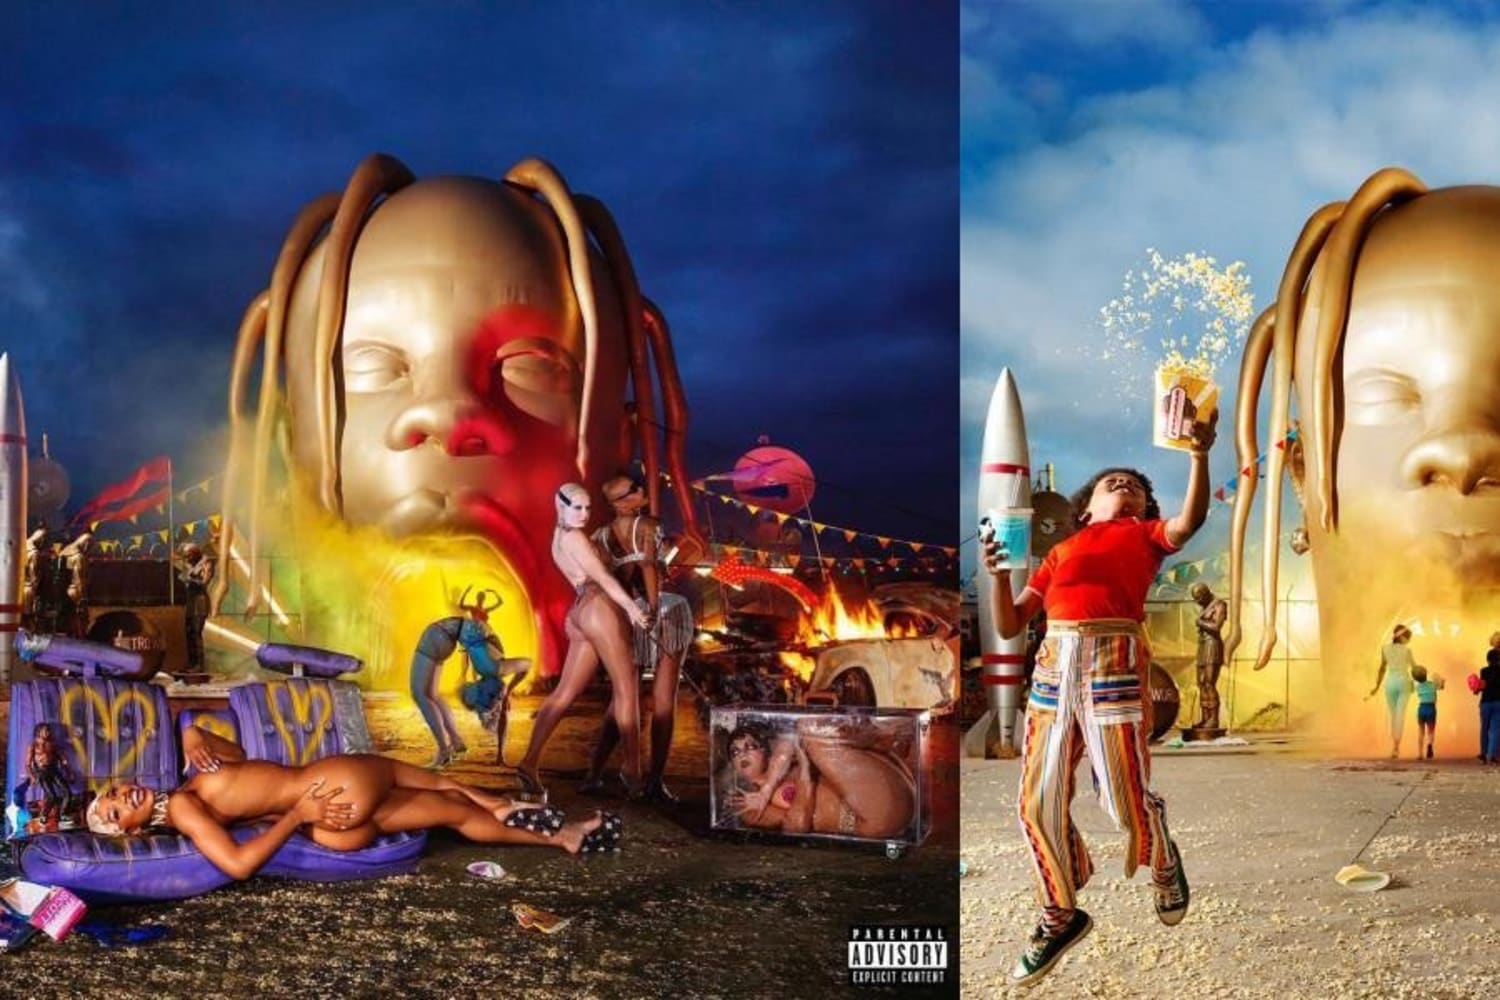 The 5 most controversial album  covers  from last year